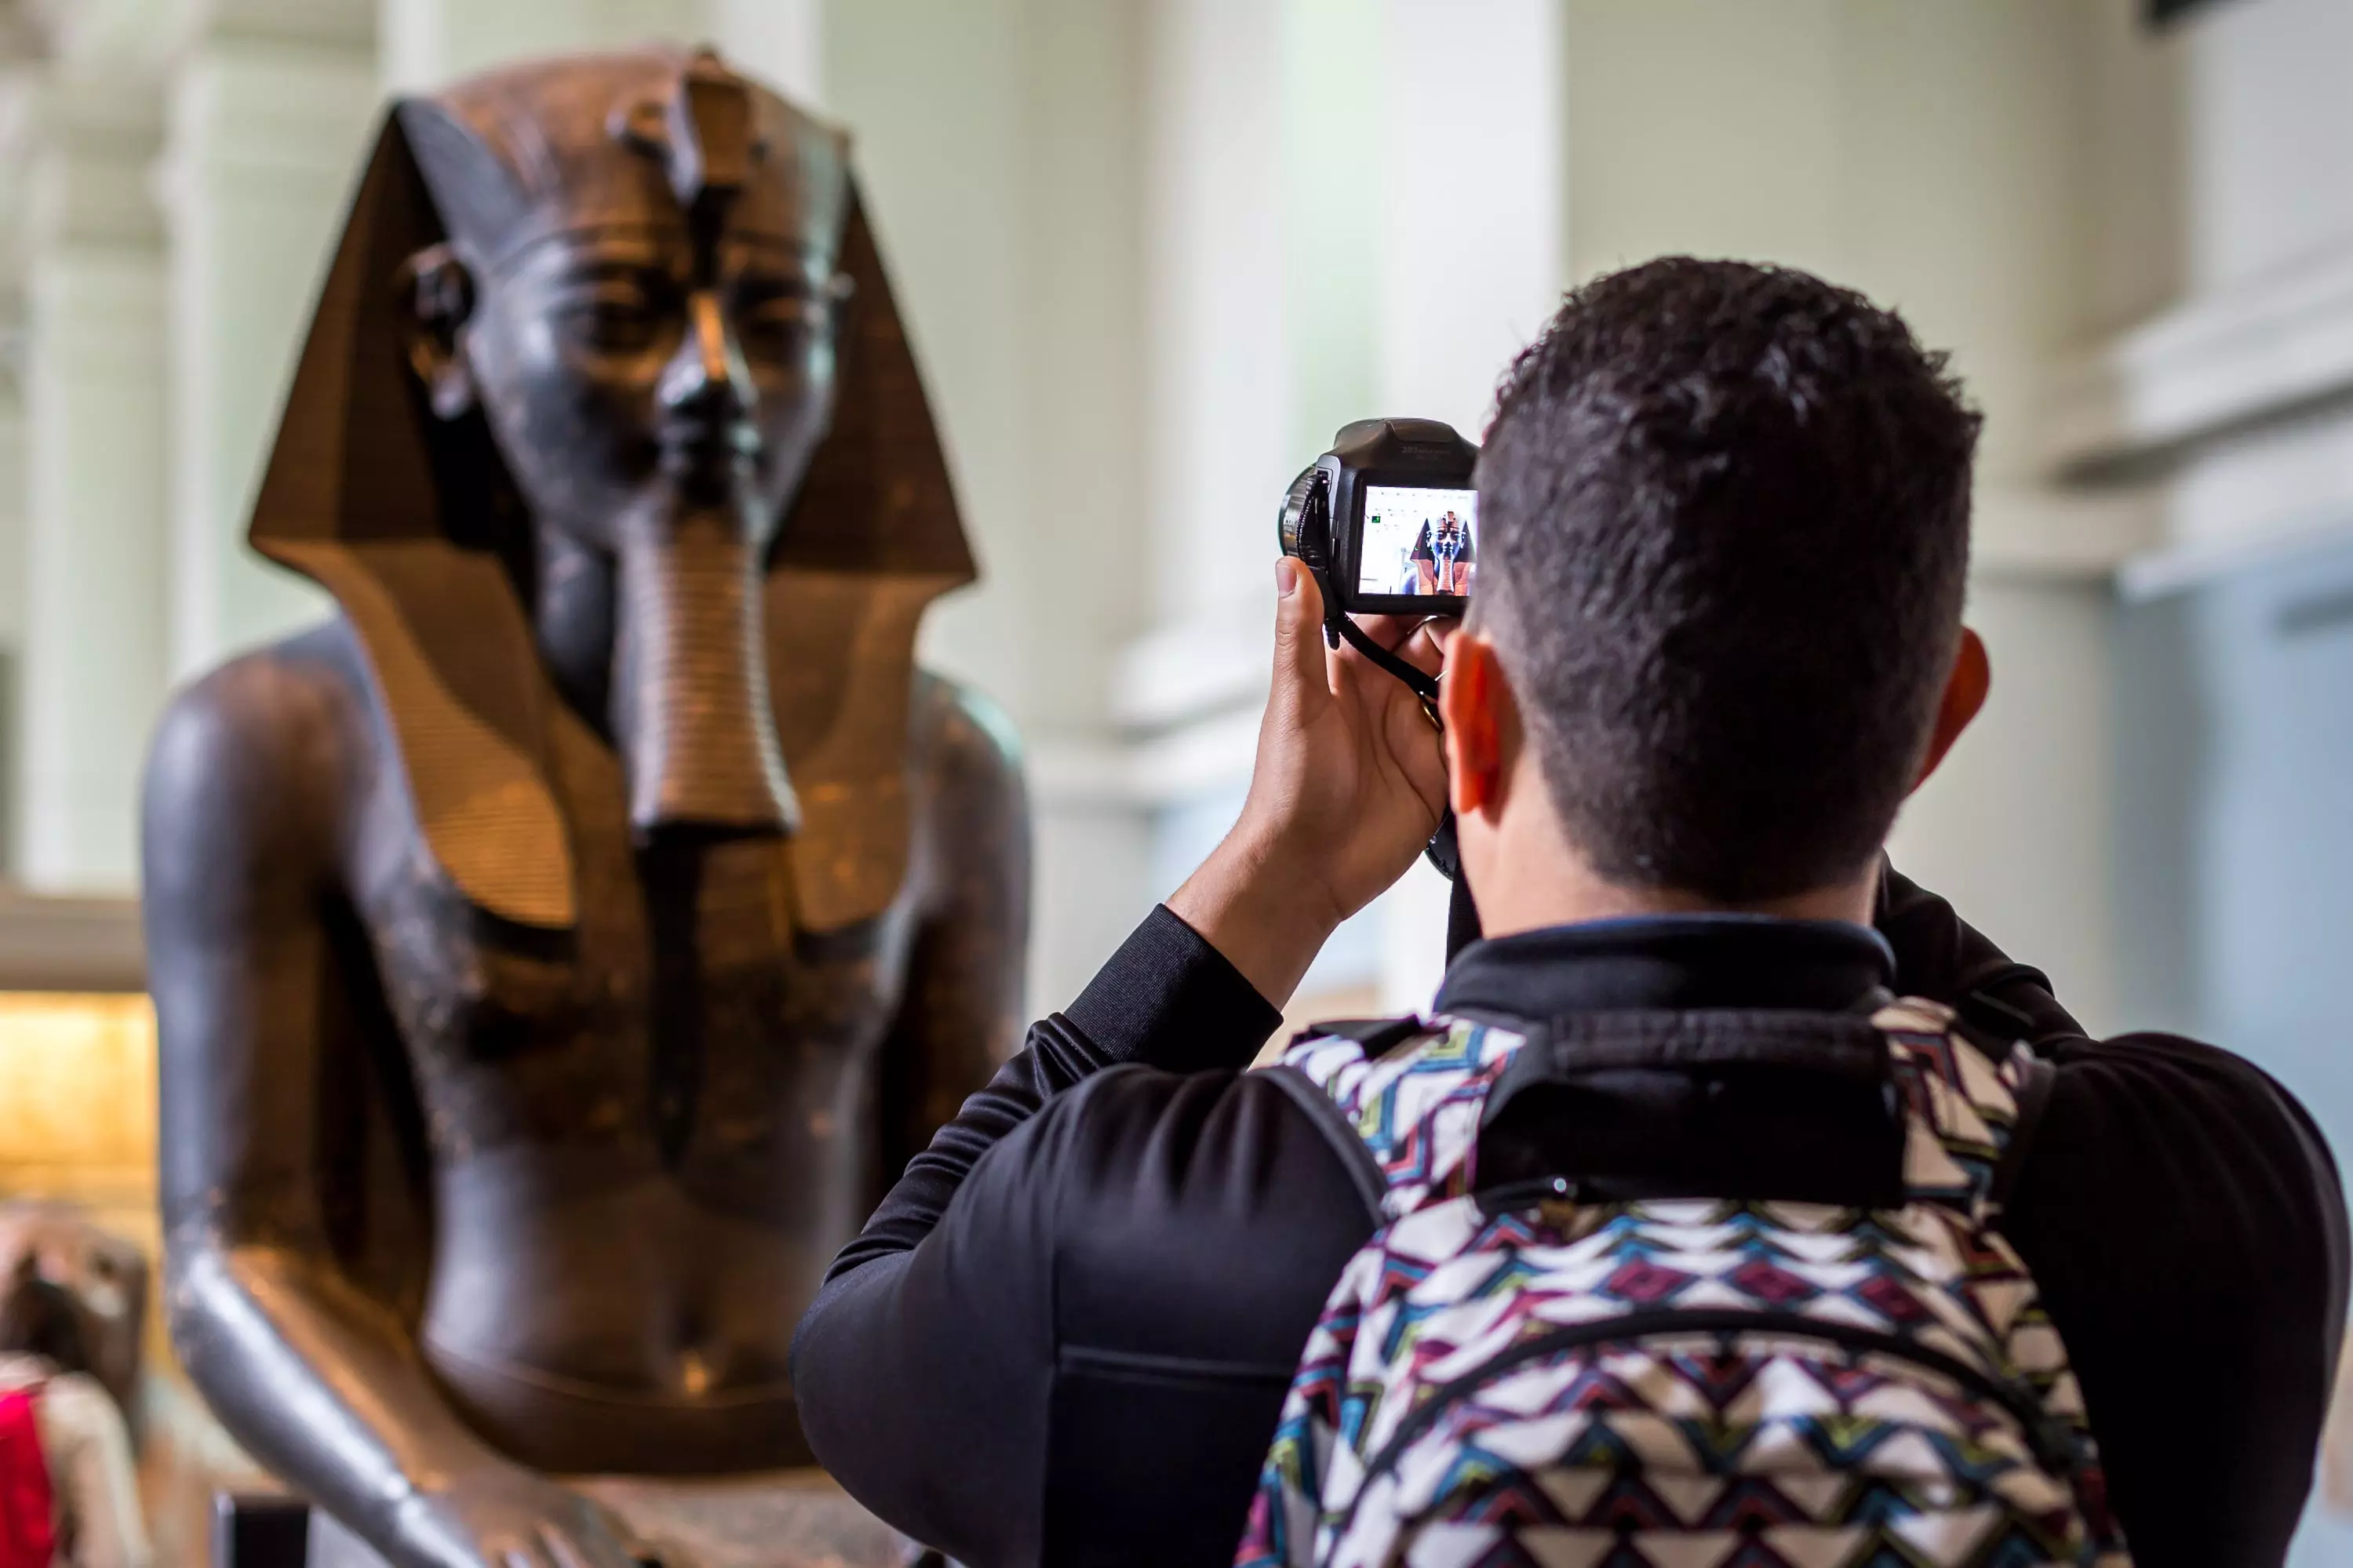 A man taking a photo of a statue of an Egyptian pharaoh